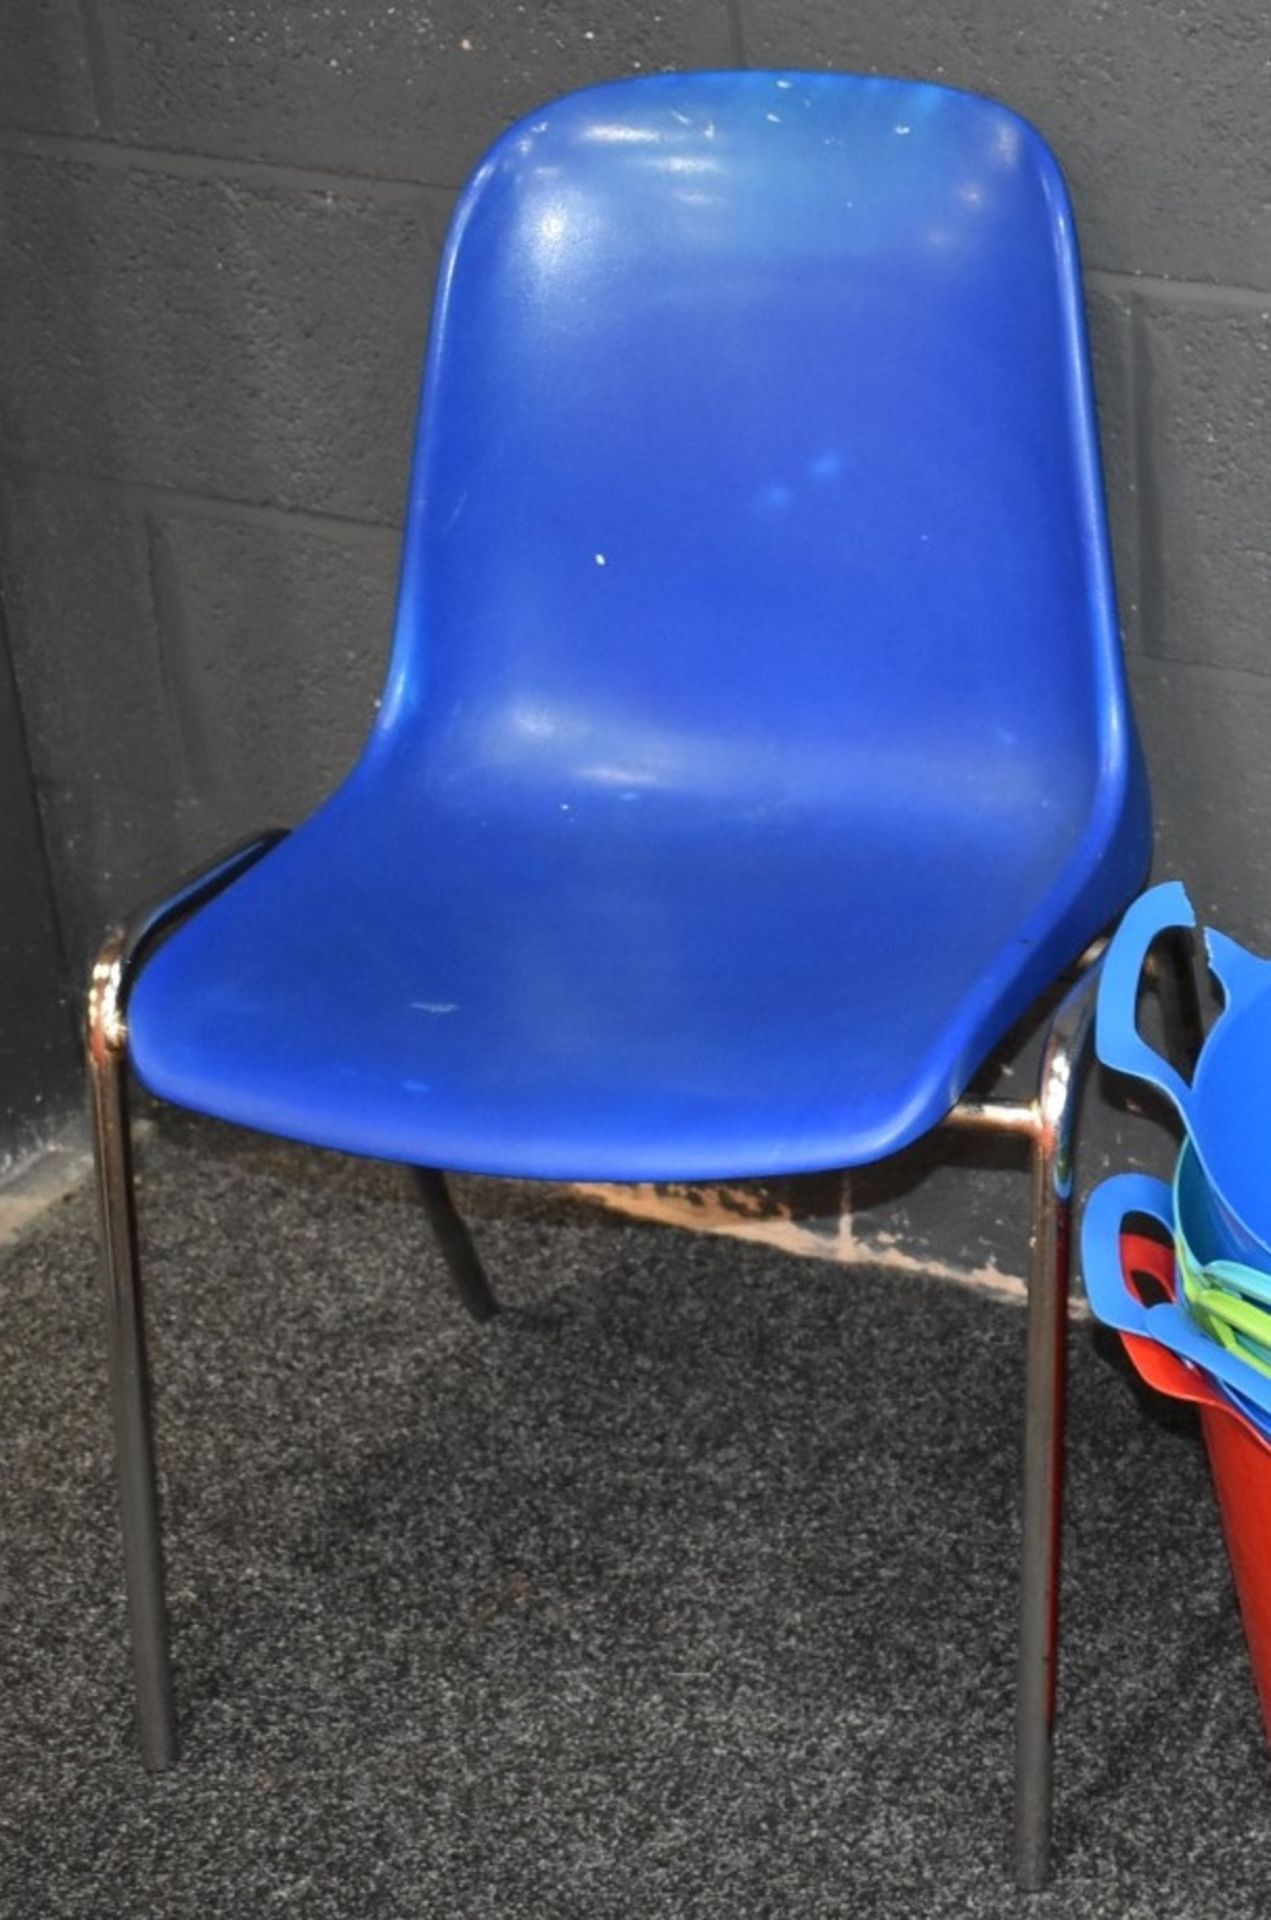 1 x Assorted Collection to Includes 2 x Blue Chairs, Travel Case, Buckets and 2 x Waste Bins - Image 4 of 5